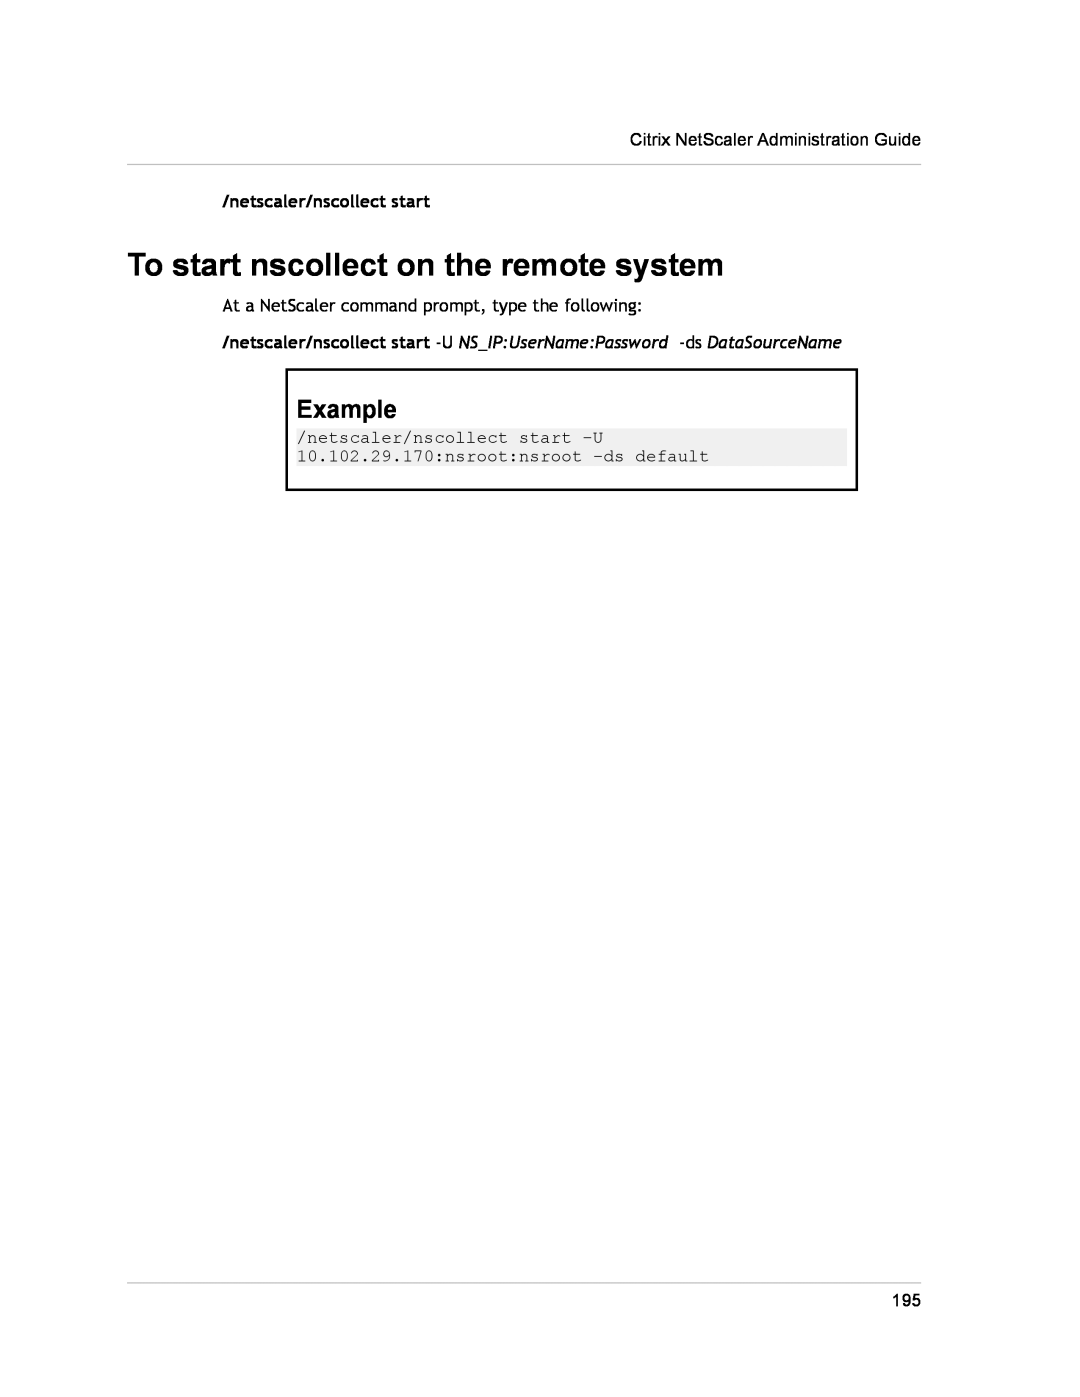 Citrix Systems CITRIX NETSCALER 9.3 manual To start nscollect on the remote system, netscaler/nscollect start, Example 